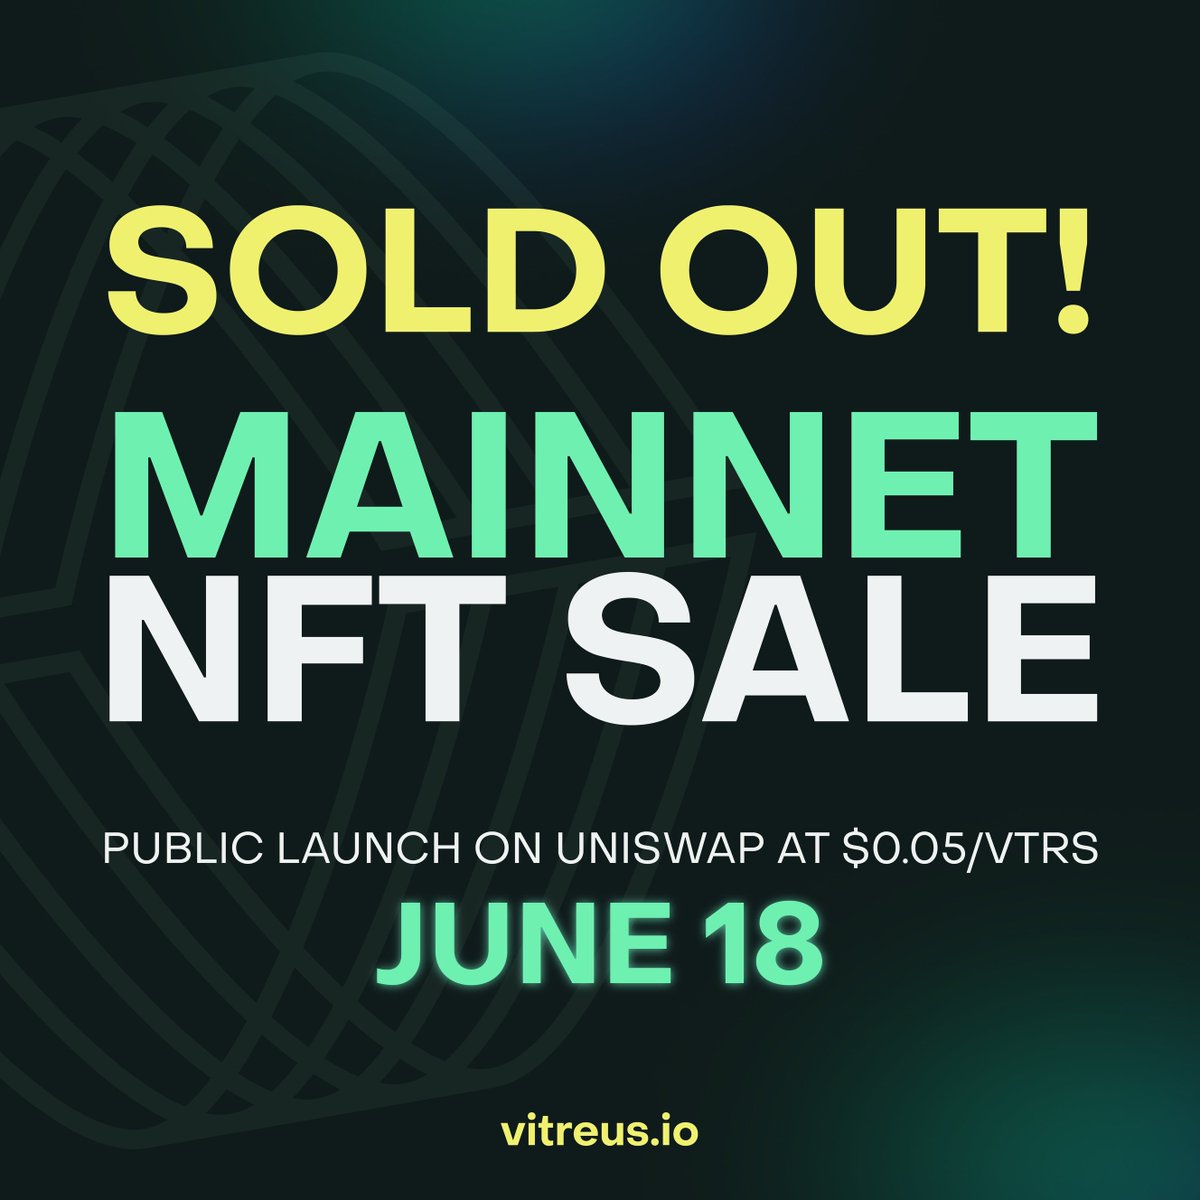 📣 SOLD OUT!! It brings us great joy to ANNOUNCE that Vitreus DAO’s MainNet NFT Sale has SOLD OUT 10 days early!! What a fantastic response to the hard work put forth by the community over the past 14 months! Claiming information will be communicated as soon as it’s ready.…